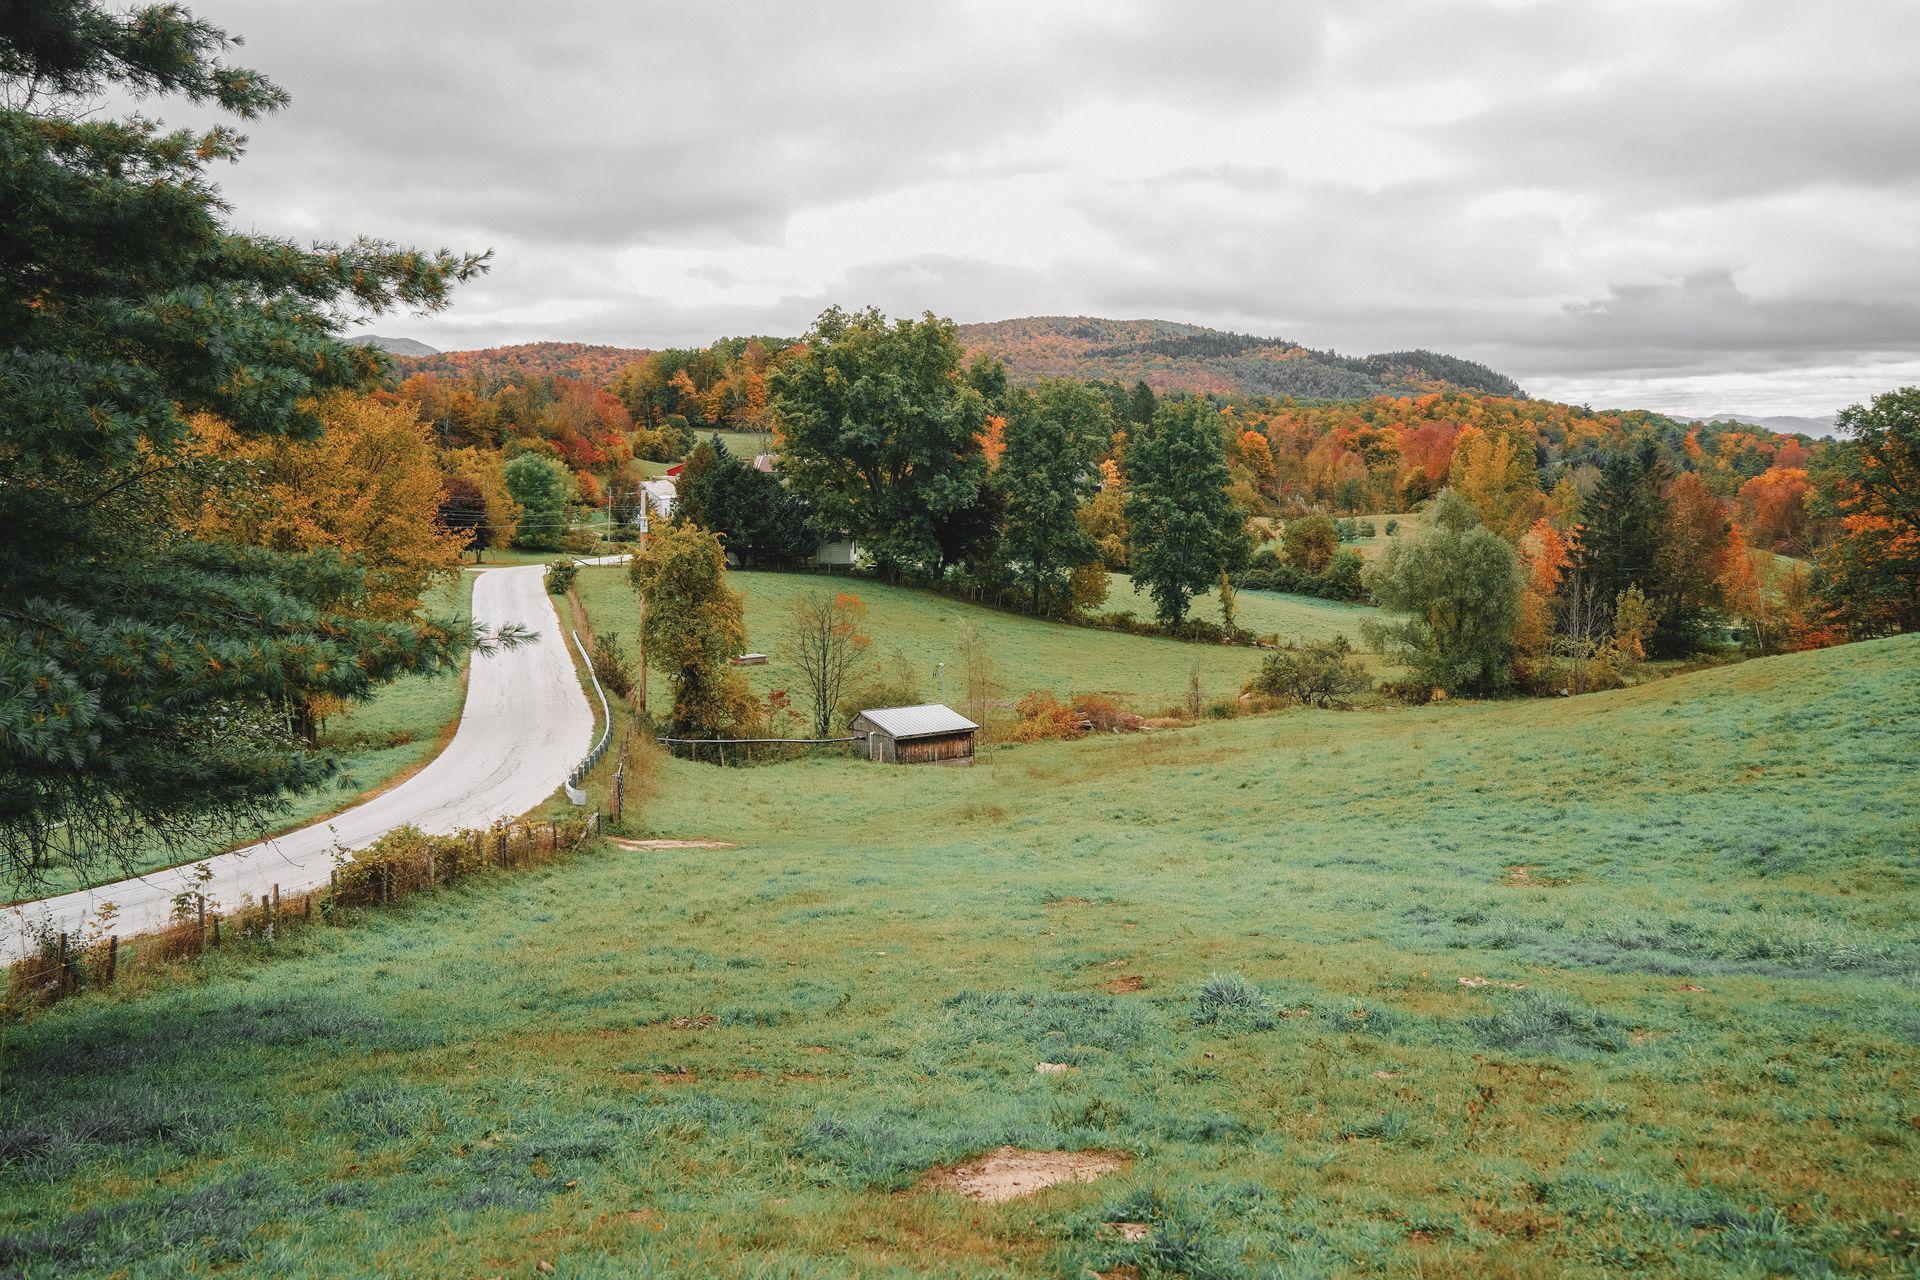 Looking down a hill at Baird Farm with hills covered in fall foliage in the distance.